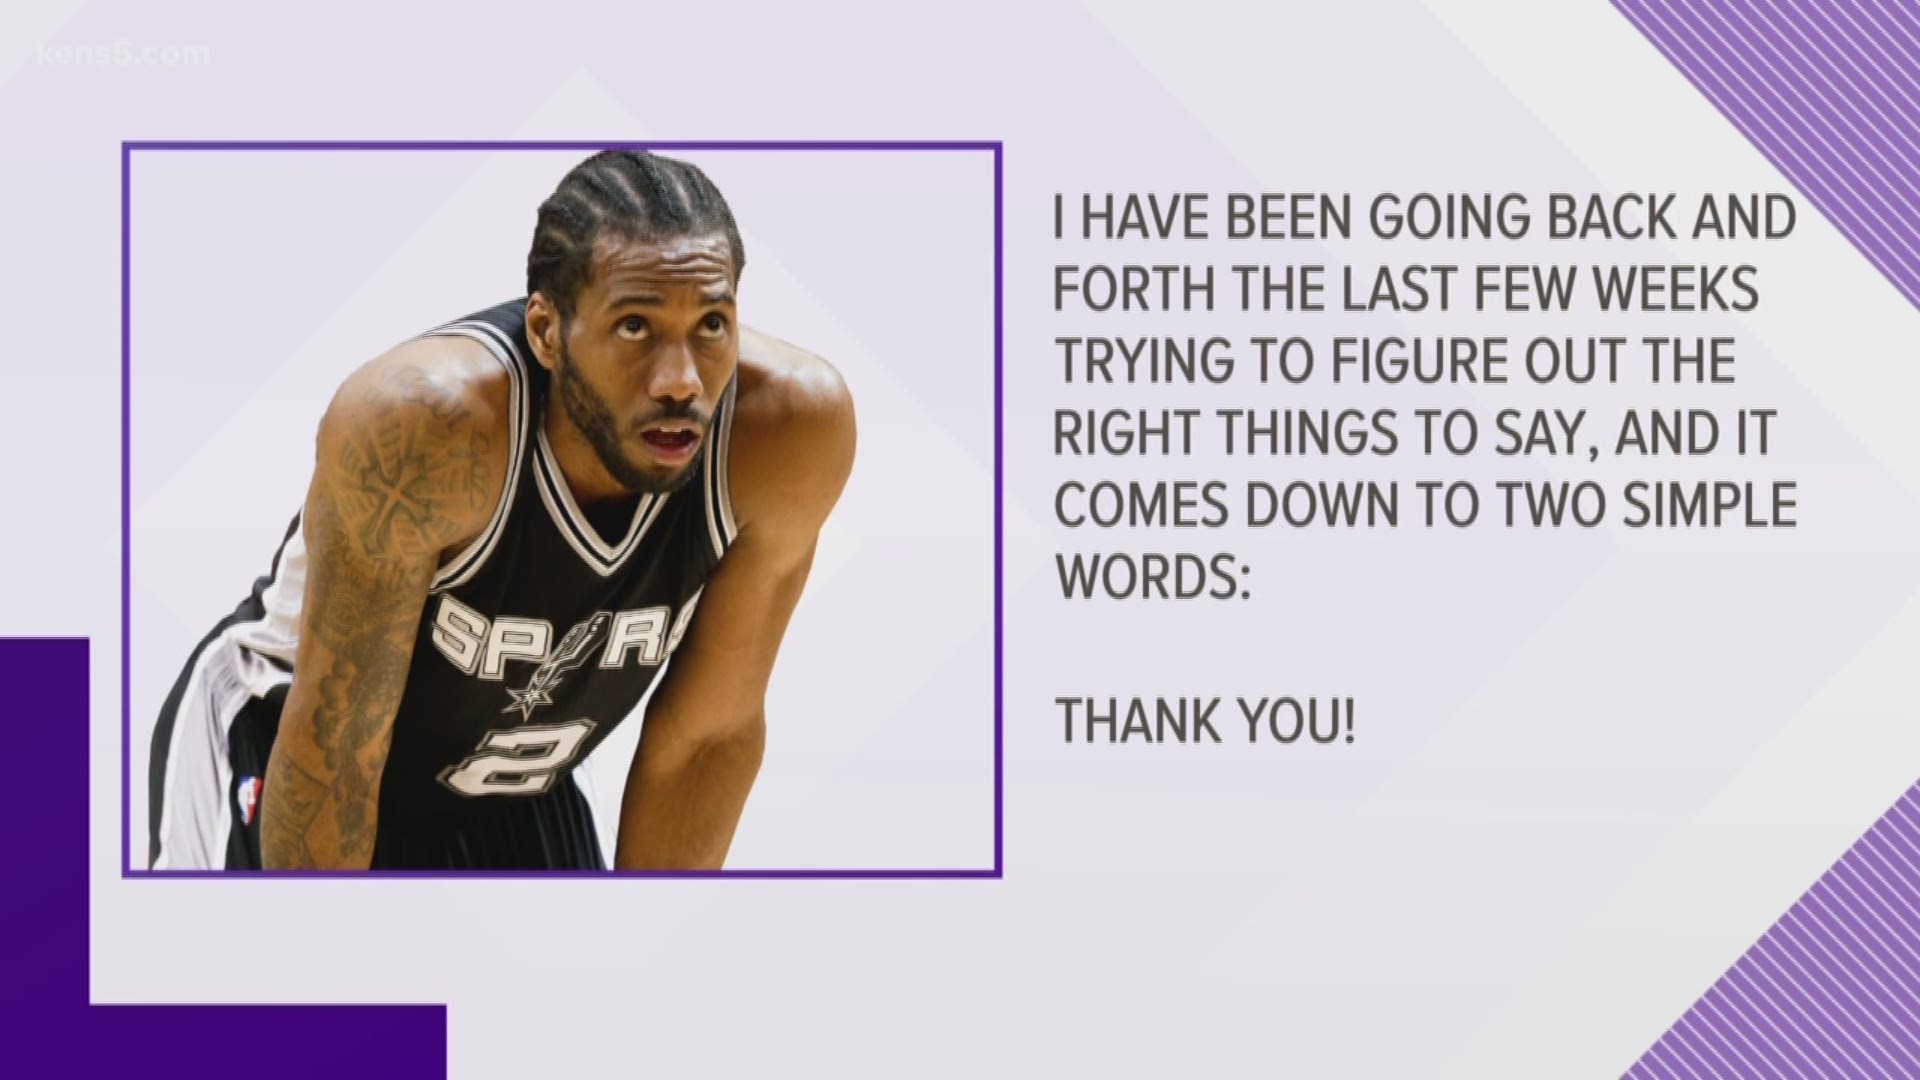 KENS 5's Evan Closky breaks down Kawhi Leonard's statement thanking the San Antonio Spurs and the team's fans.